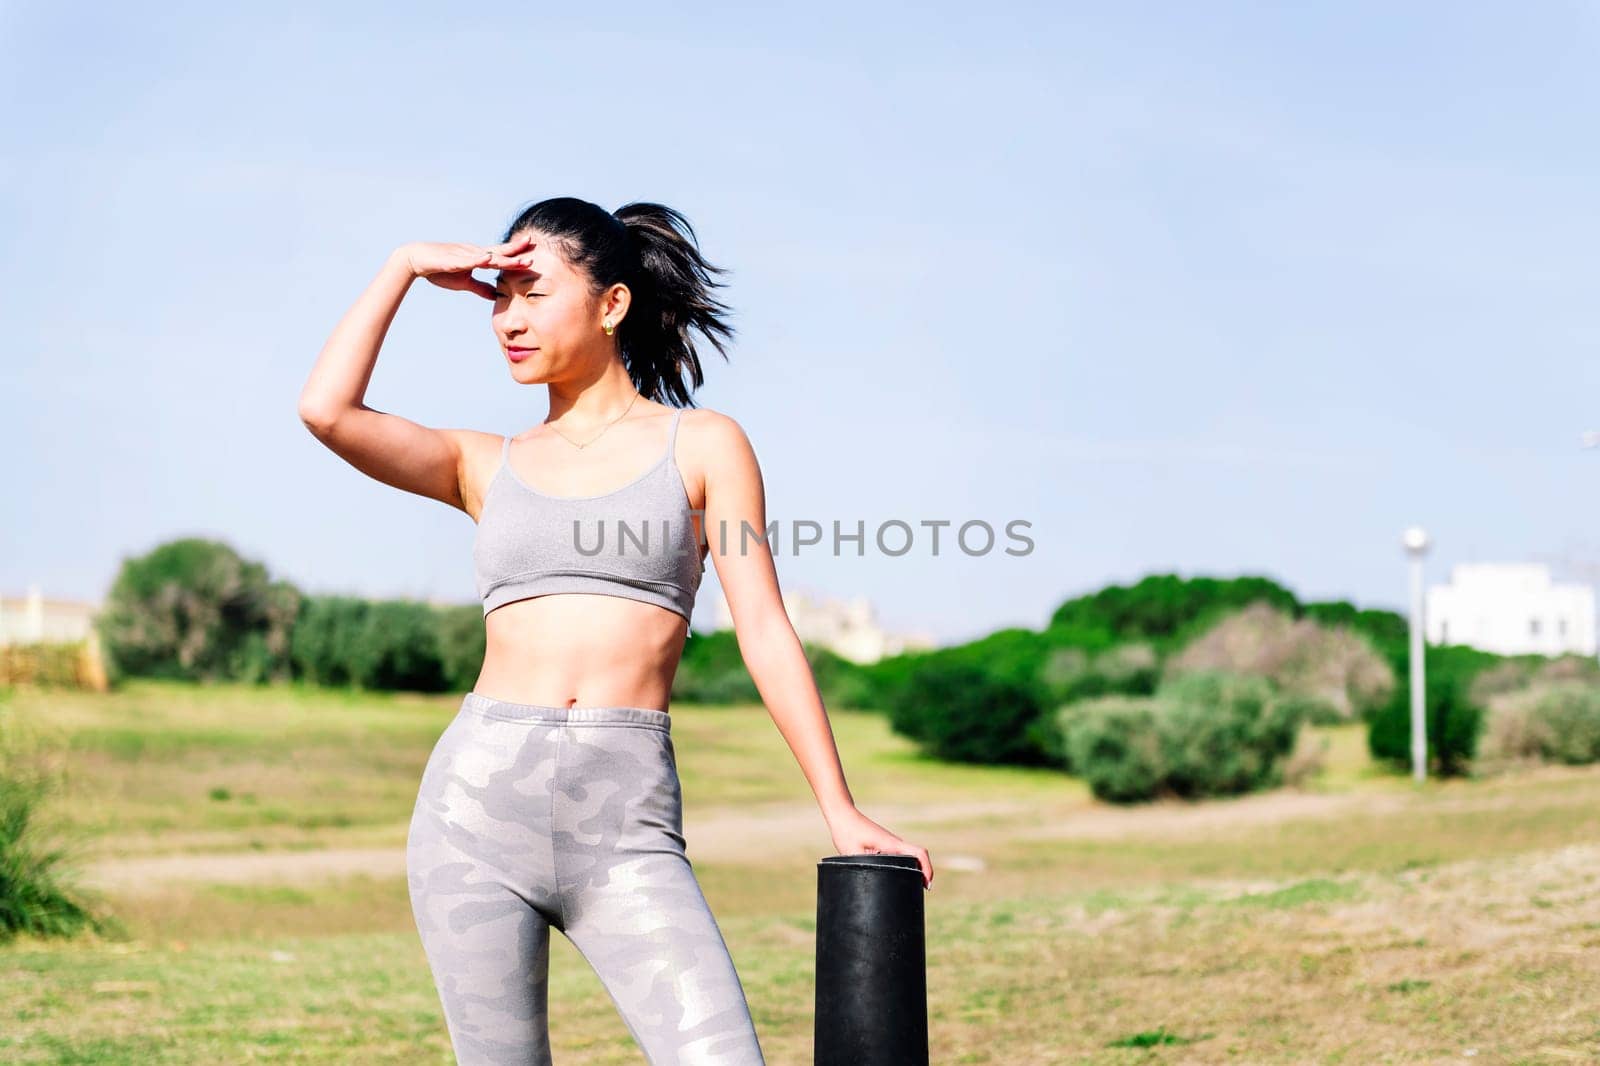 smiling young asian woman in sportswear ready with her mat for a yoga session on the grass in the park, healthy and active lifestyle concept, copy space for text